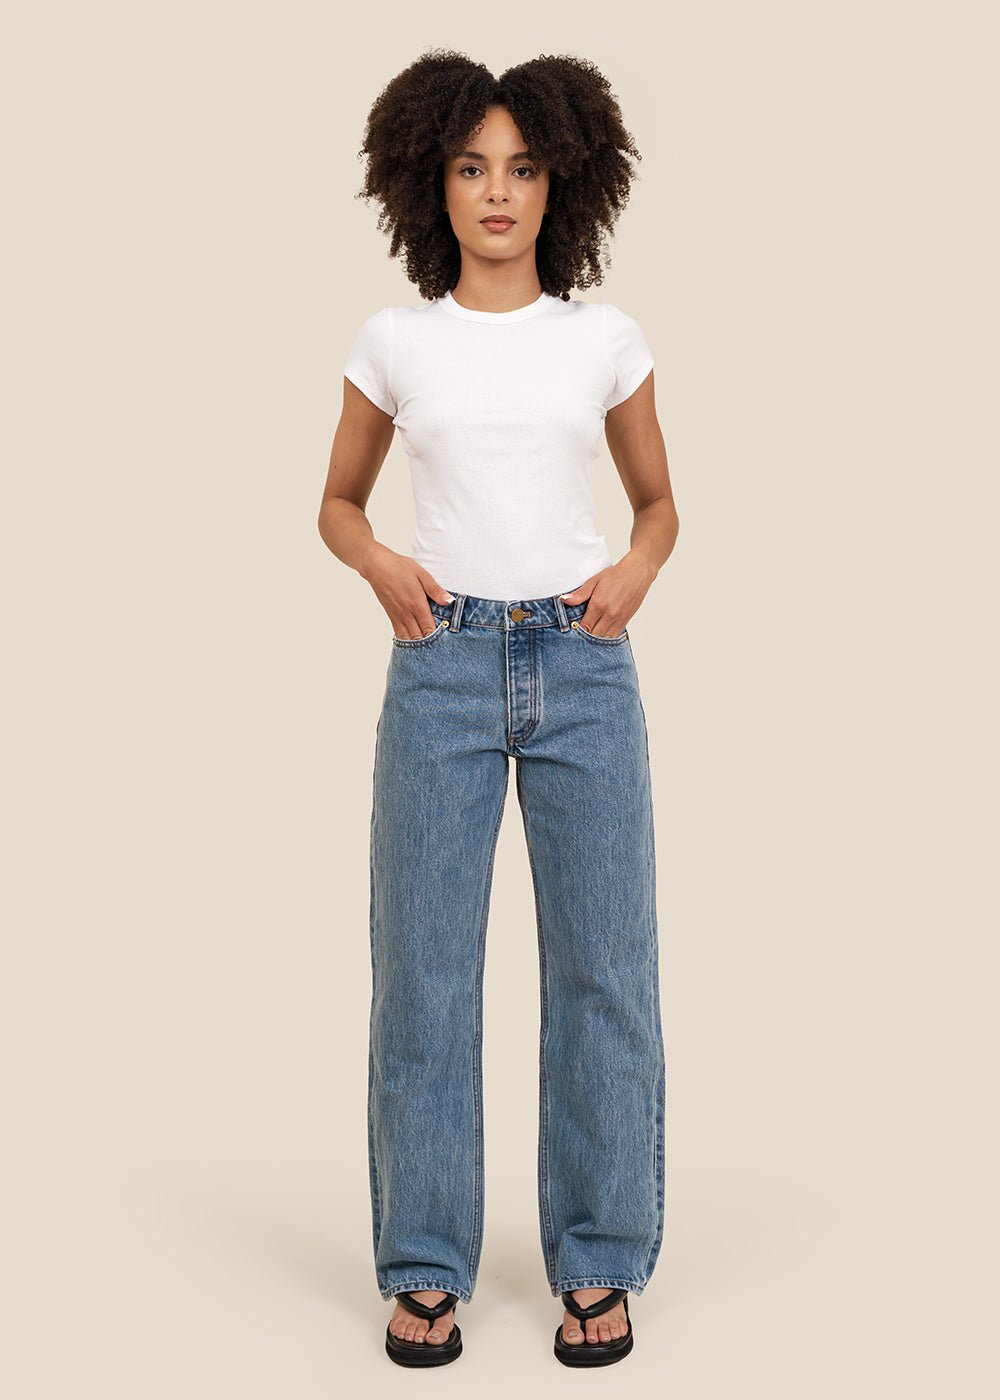 Retro Chic Look in Wide Leg Jeans